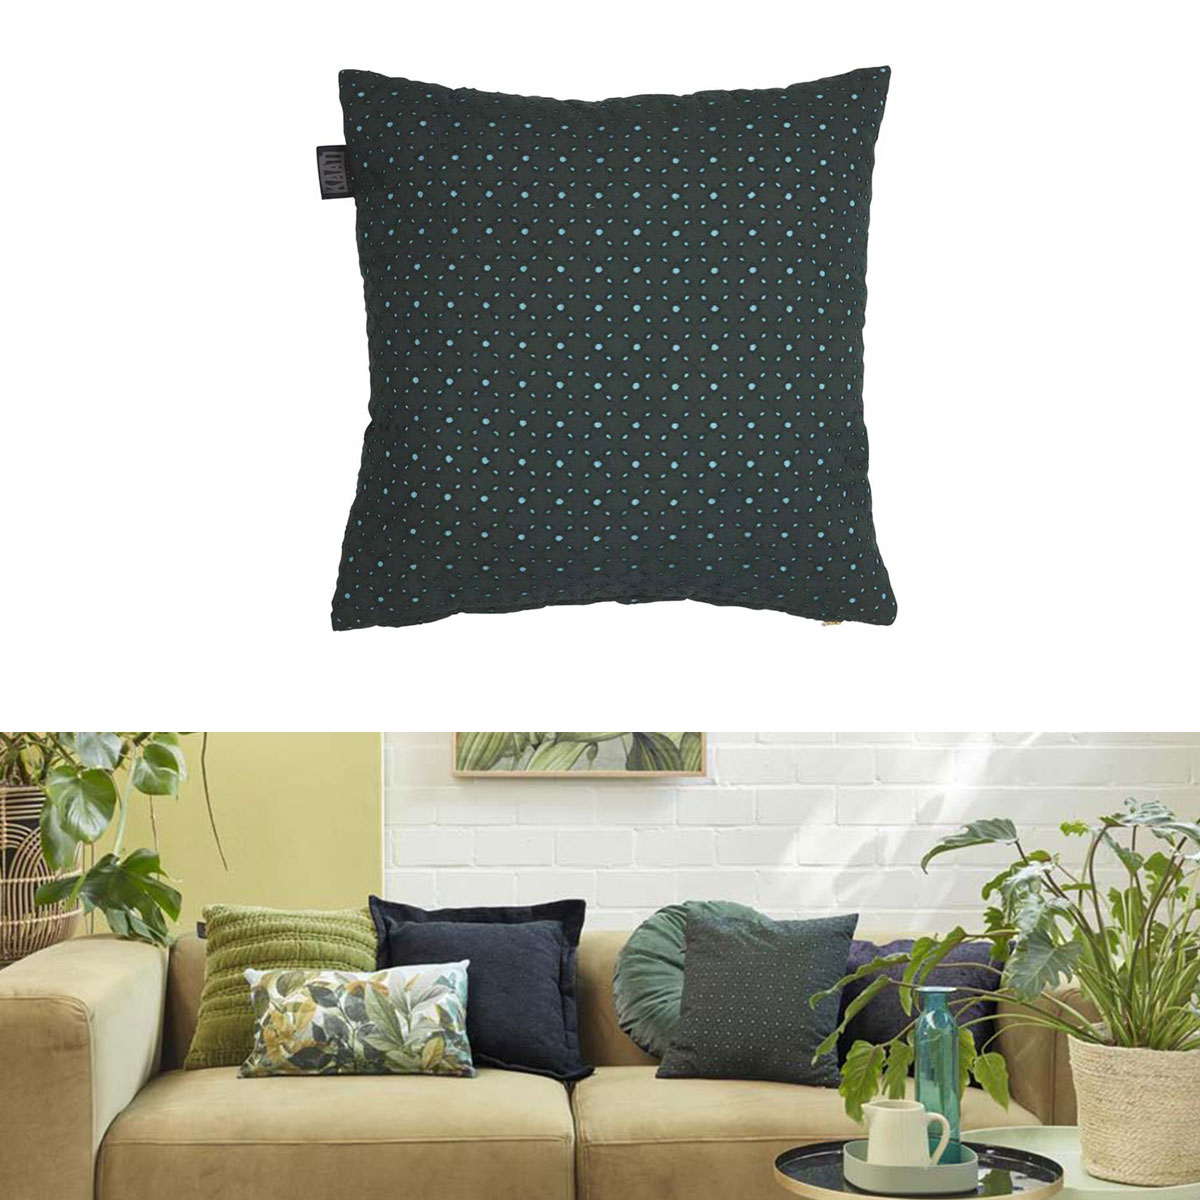 Bedding House Chelsy Square Filled Cushion 40cm x 40cm Price